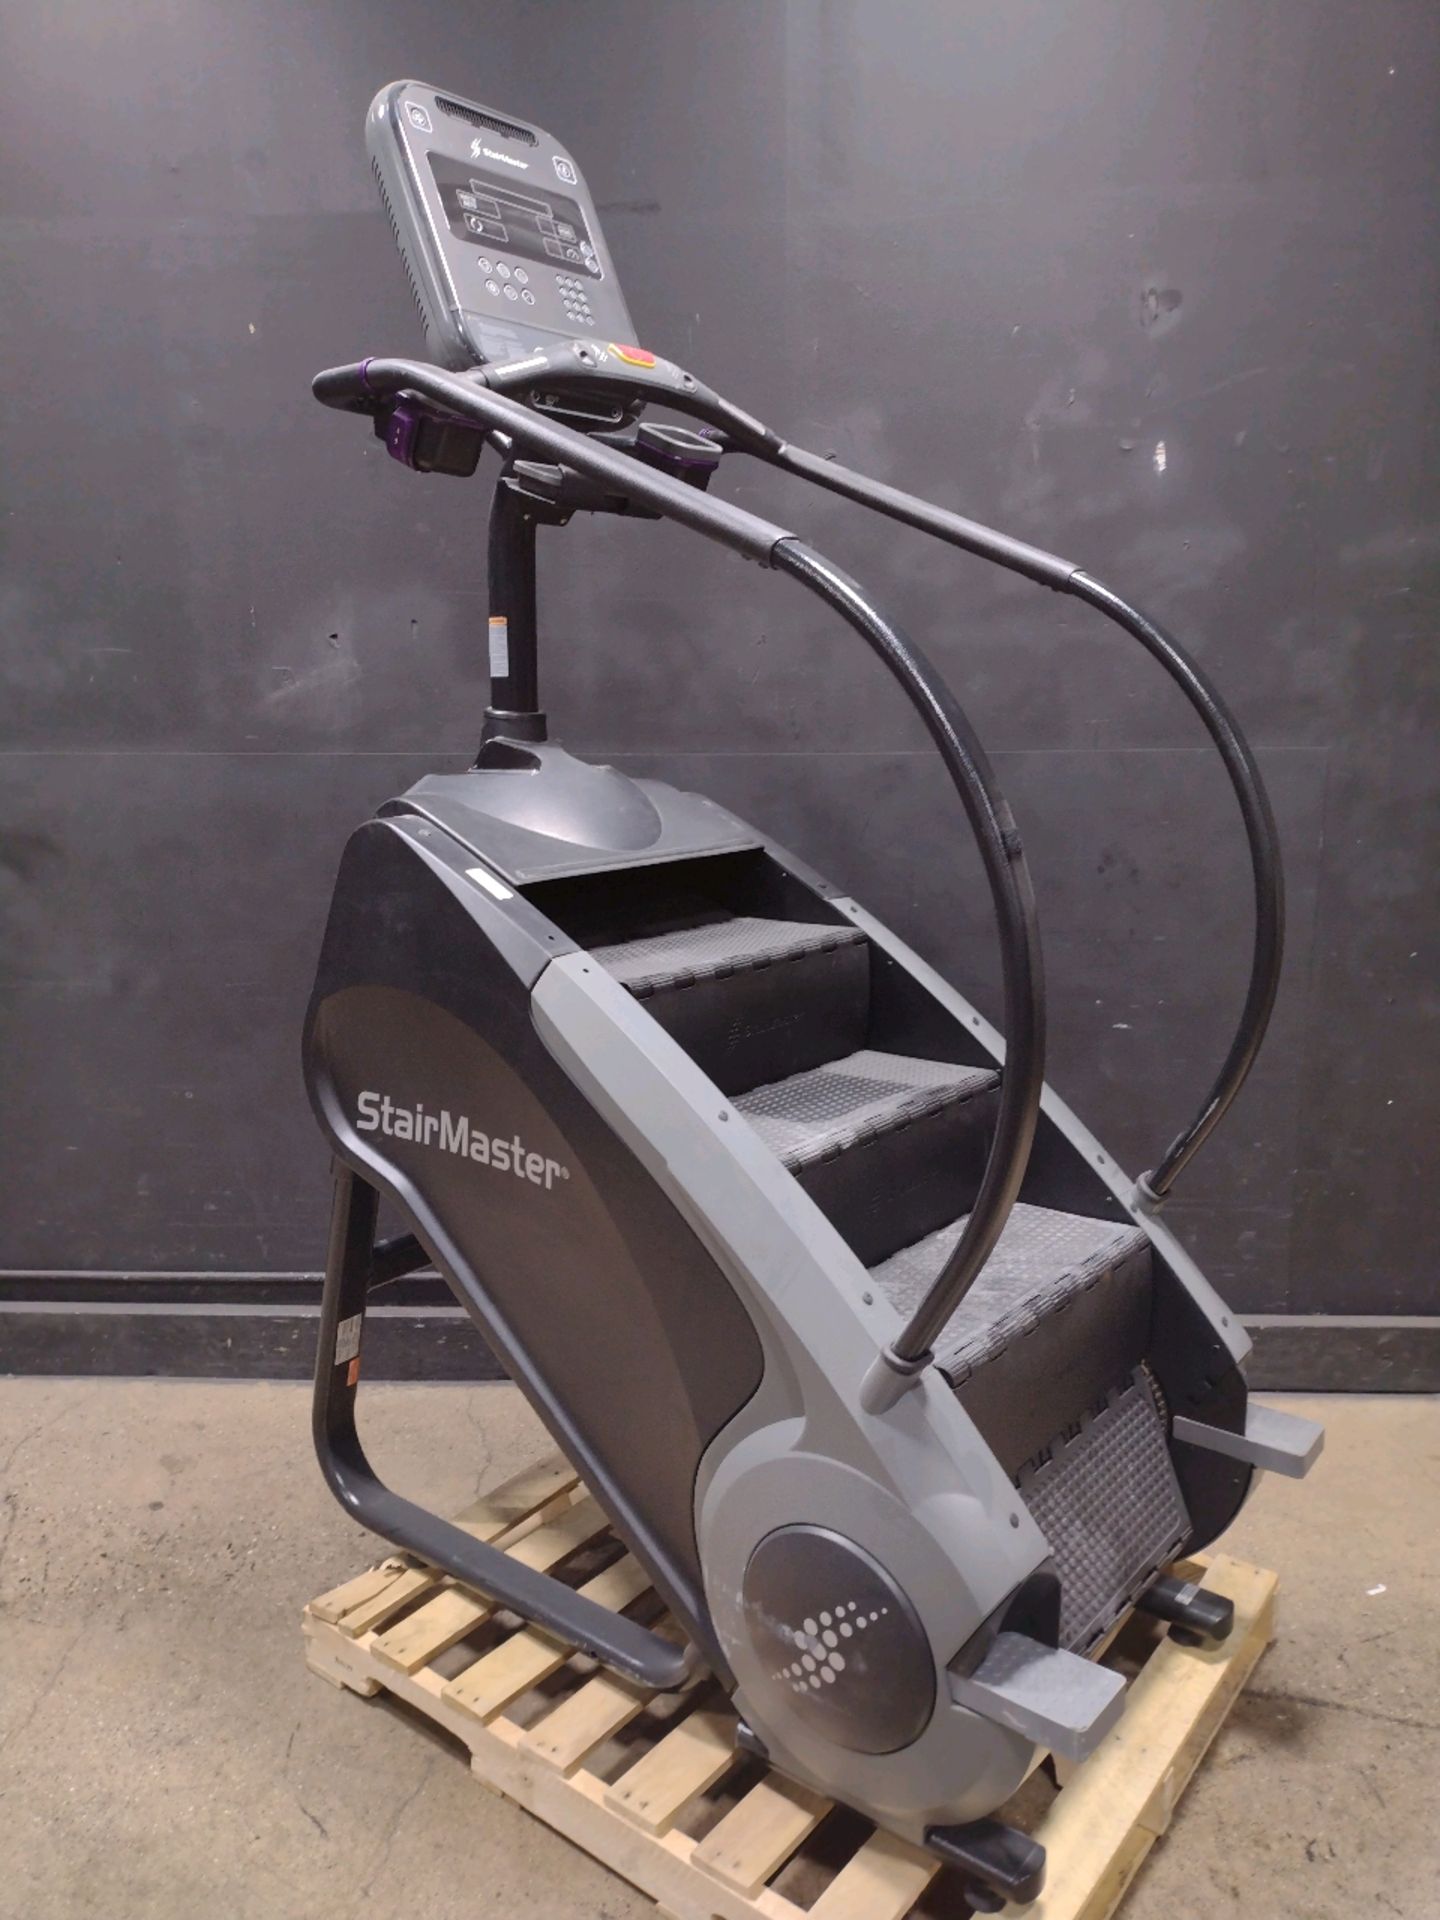 STAIRMASTER STEPMILL (LOCATED AT 3325 MOUNT PROSPECT ROAD, FRANKLIN PARK, IL, 60131)